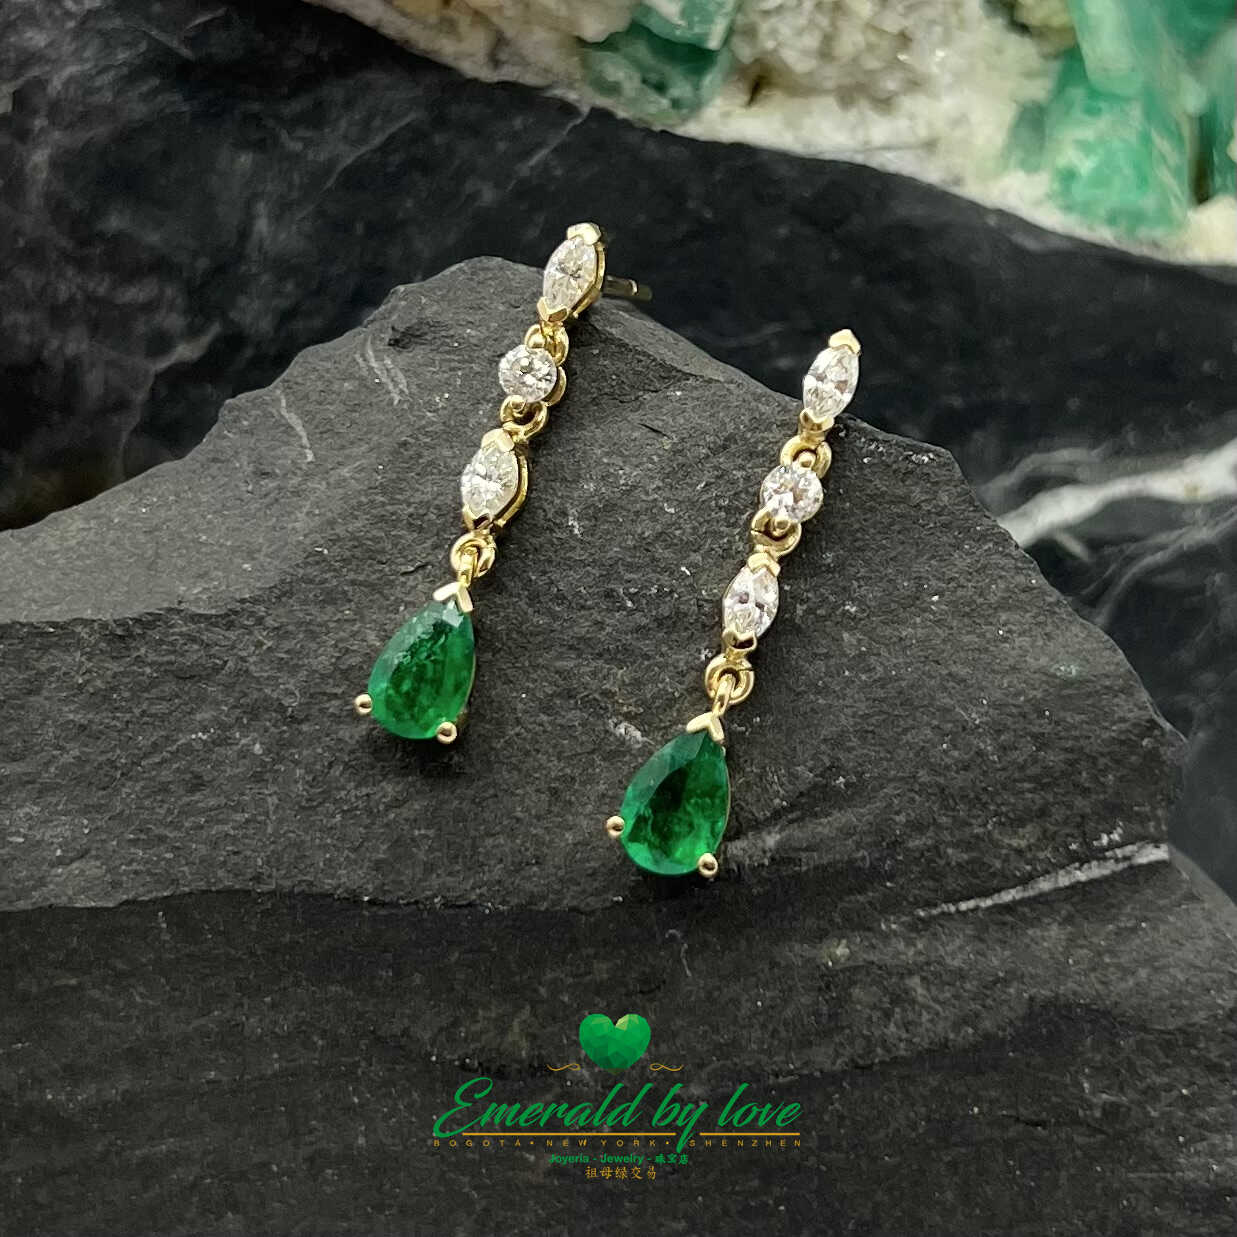 Gilded Harmony: 18K Yellow Gold Earrings with 1.35 TCW Pear-shaped Emeralds - Diamonds